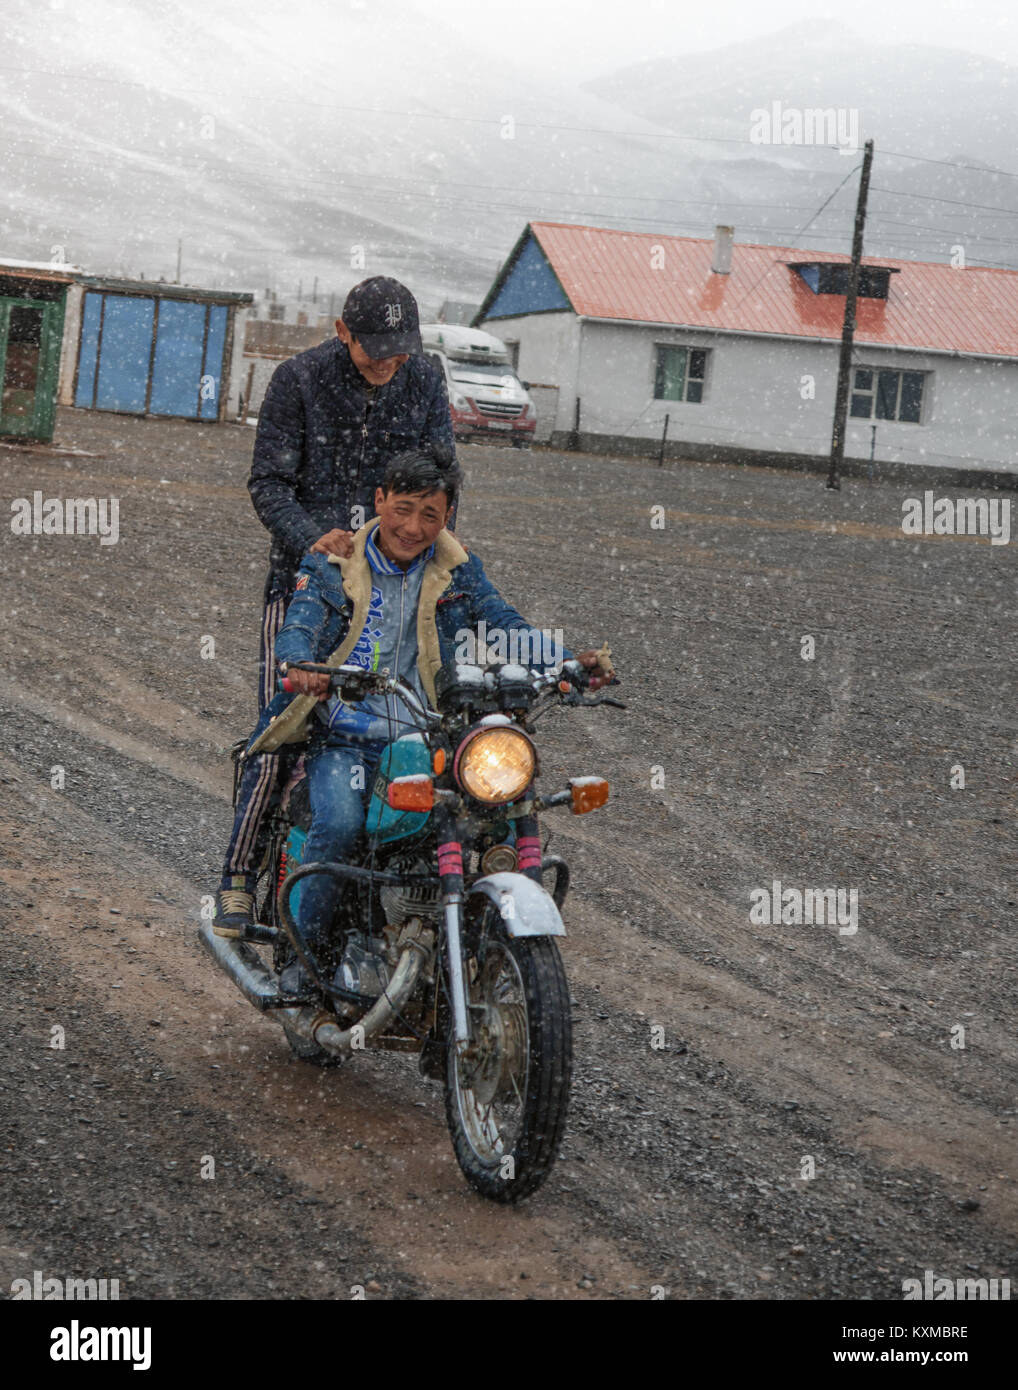 Country side rural two young men riding motorbike snow winter cold Mongolia town Stock Photo